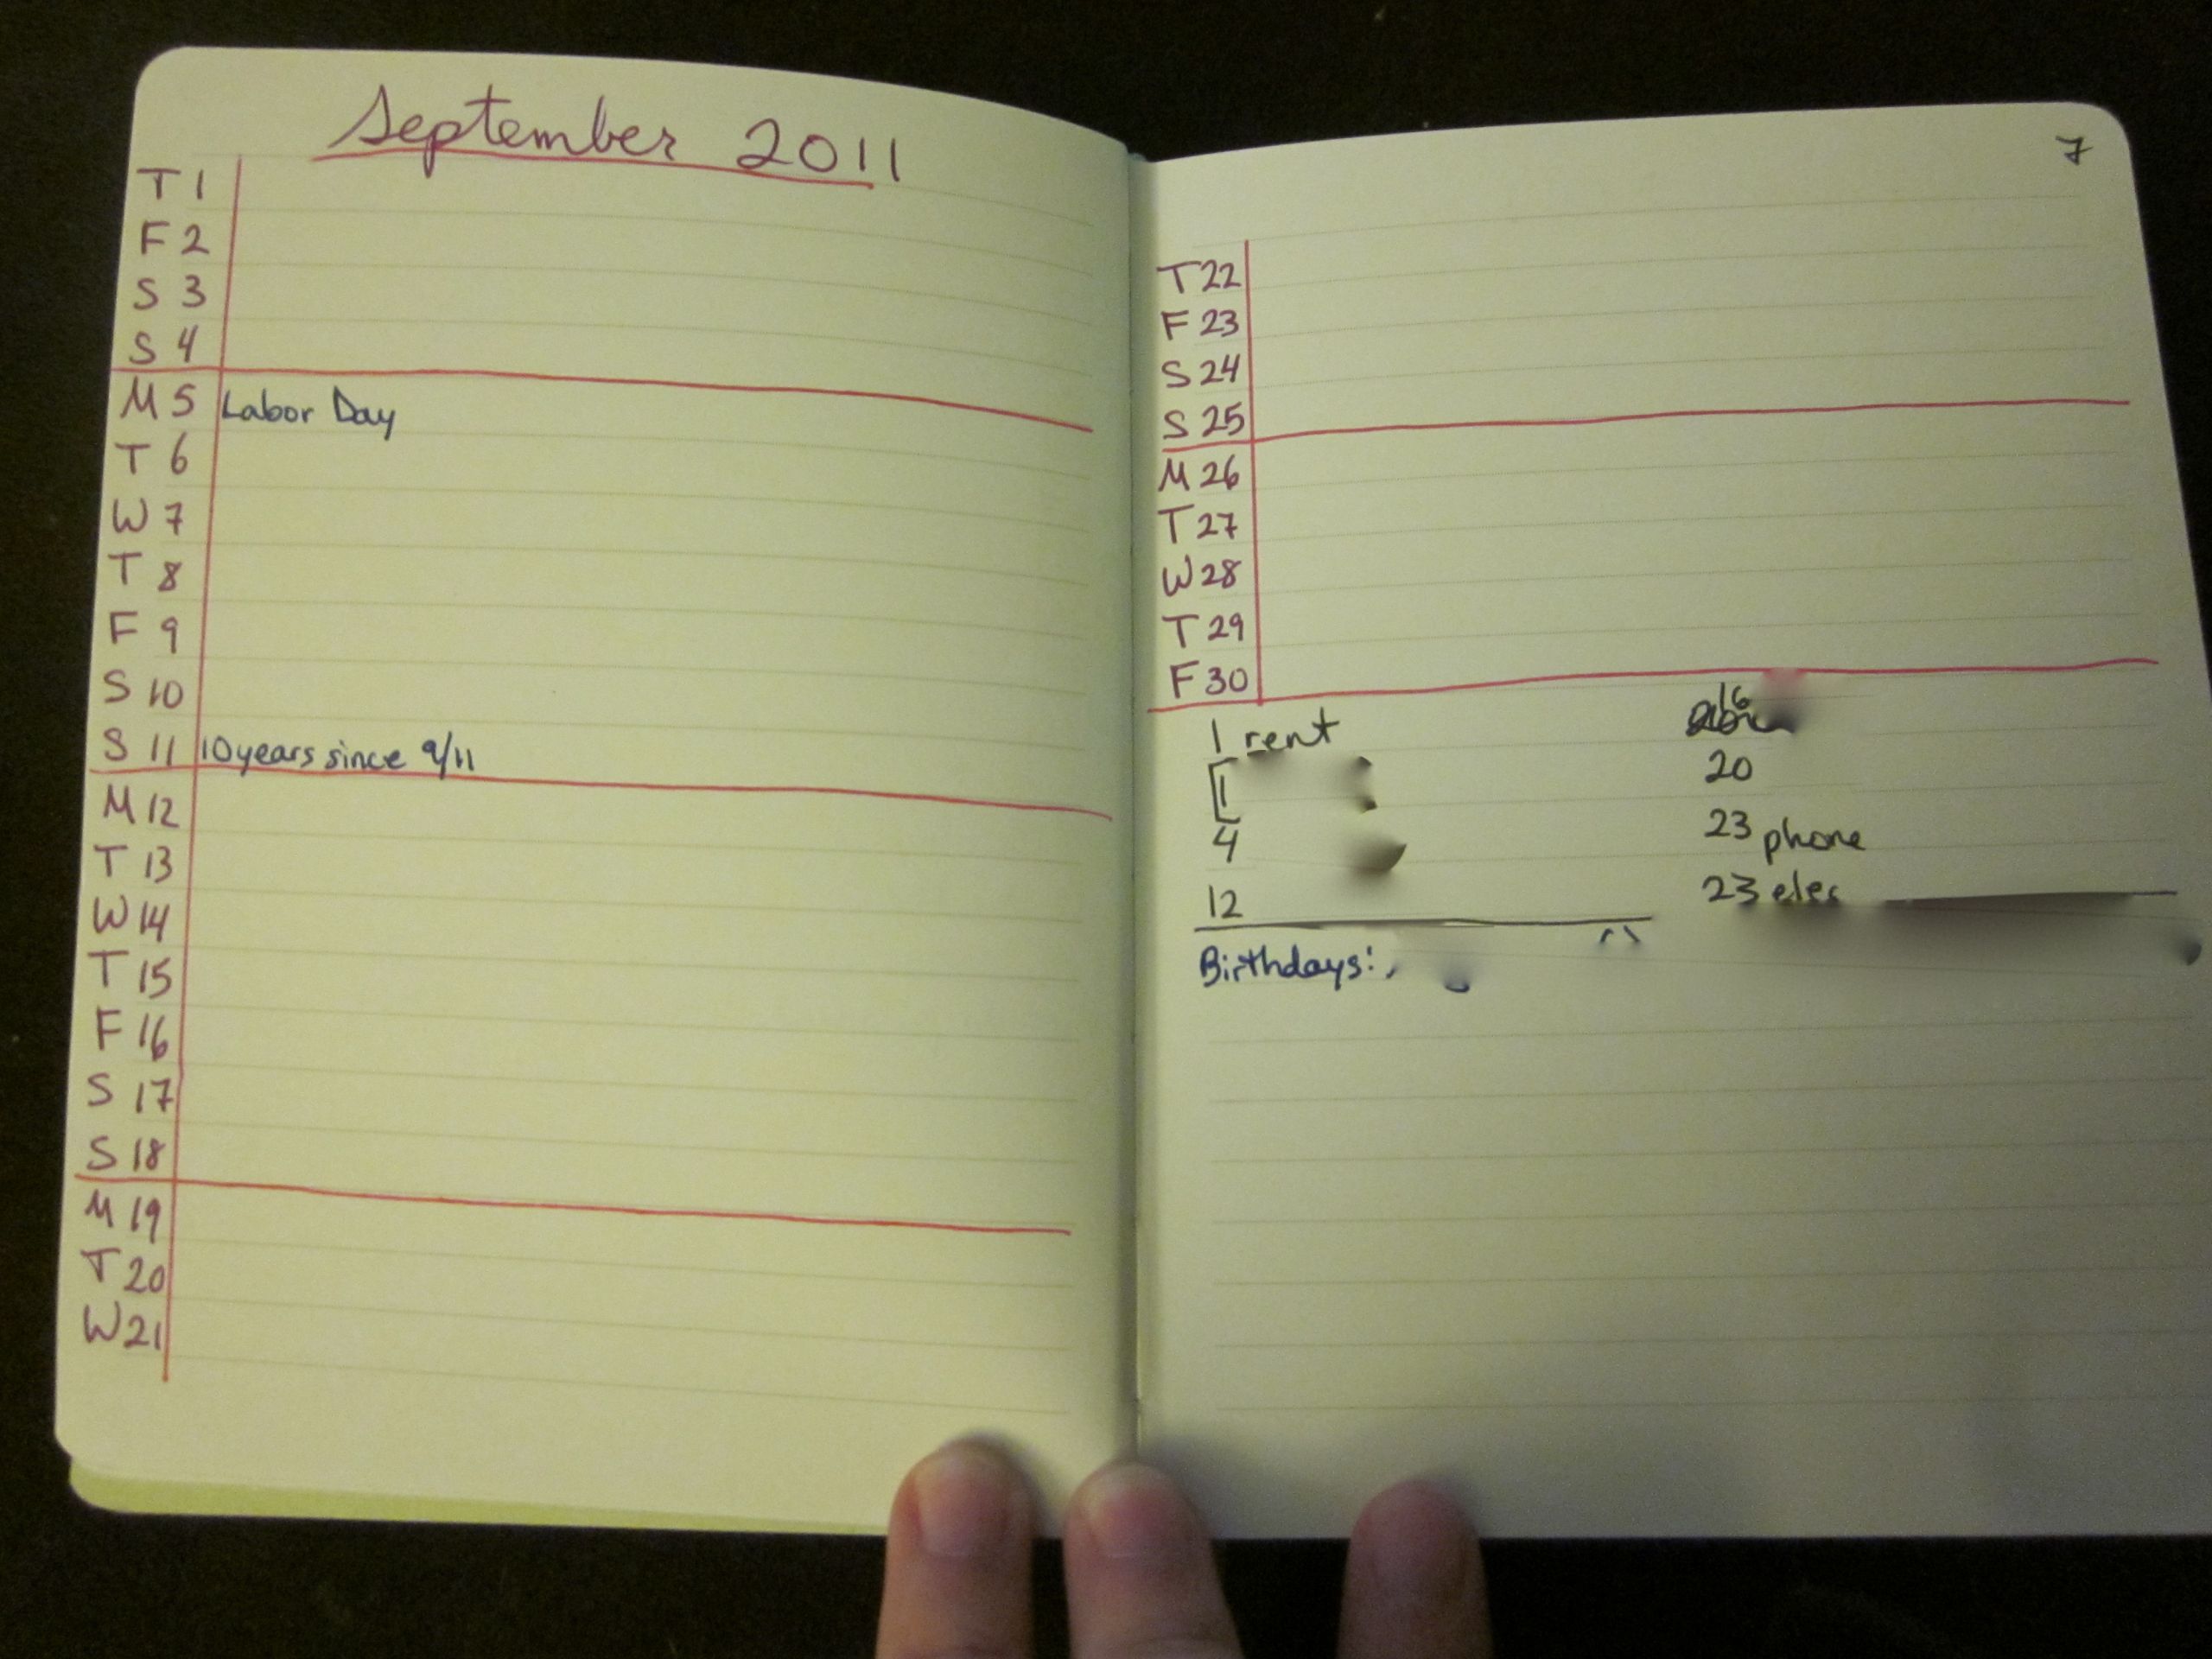 DIY Notebook Planner
 My DIY planner which I may end up not using – Bluebonnet